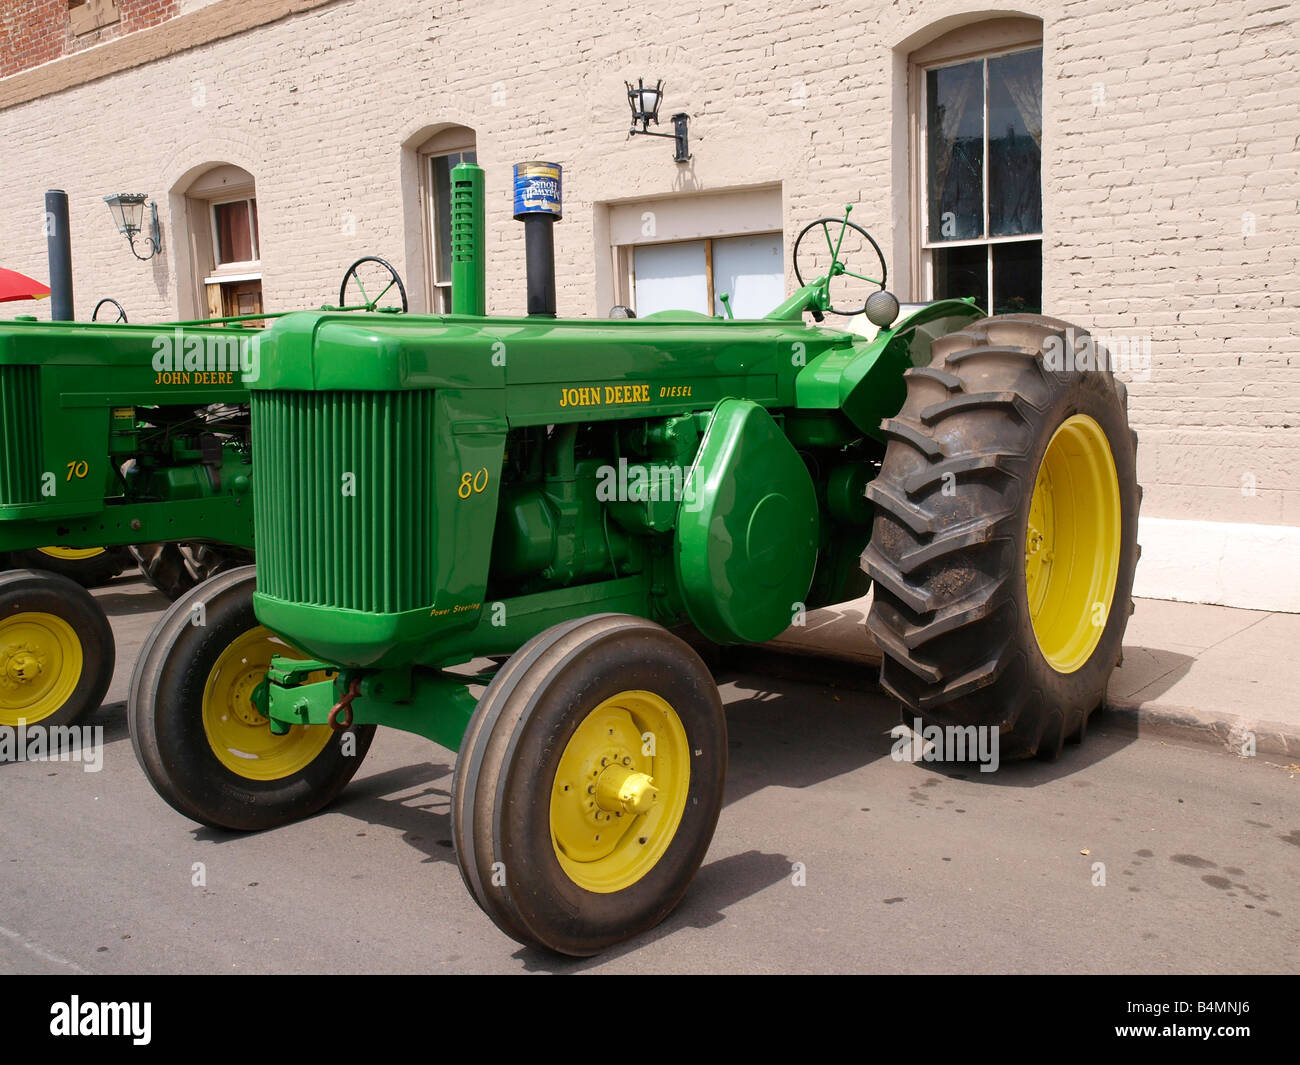 John Deere Model 80 Tractor together with other classic tractors decked out for the 4th July Parade Williams AZ US Stock Photo